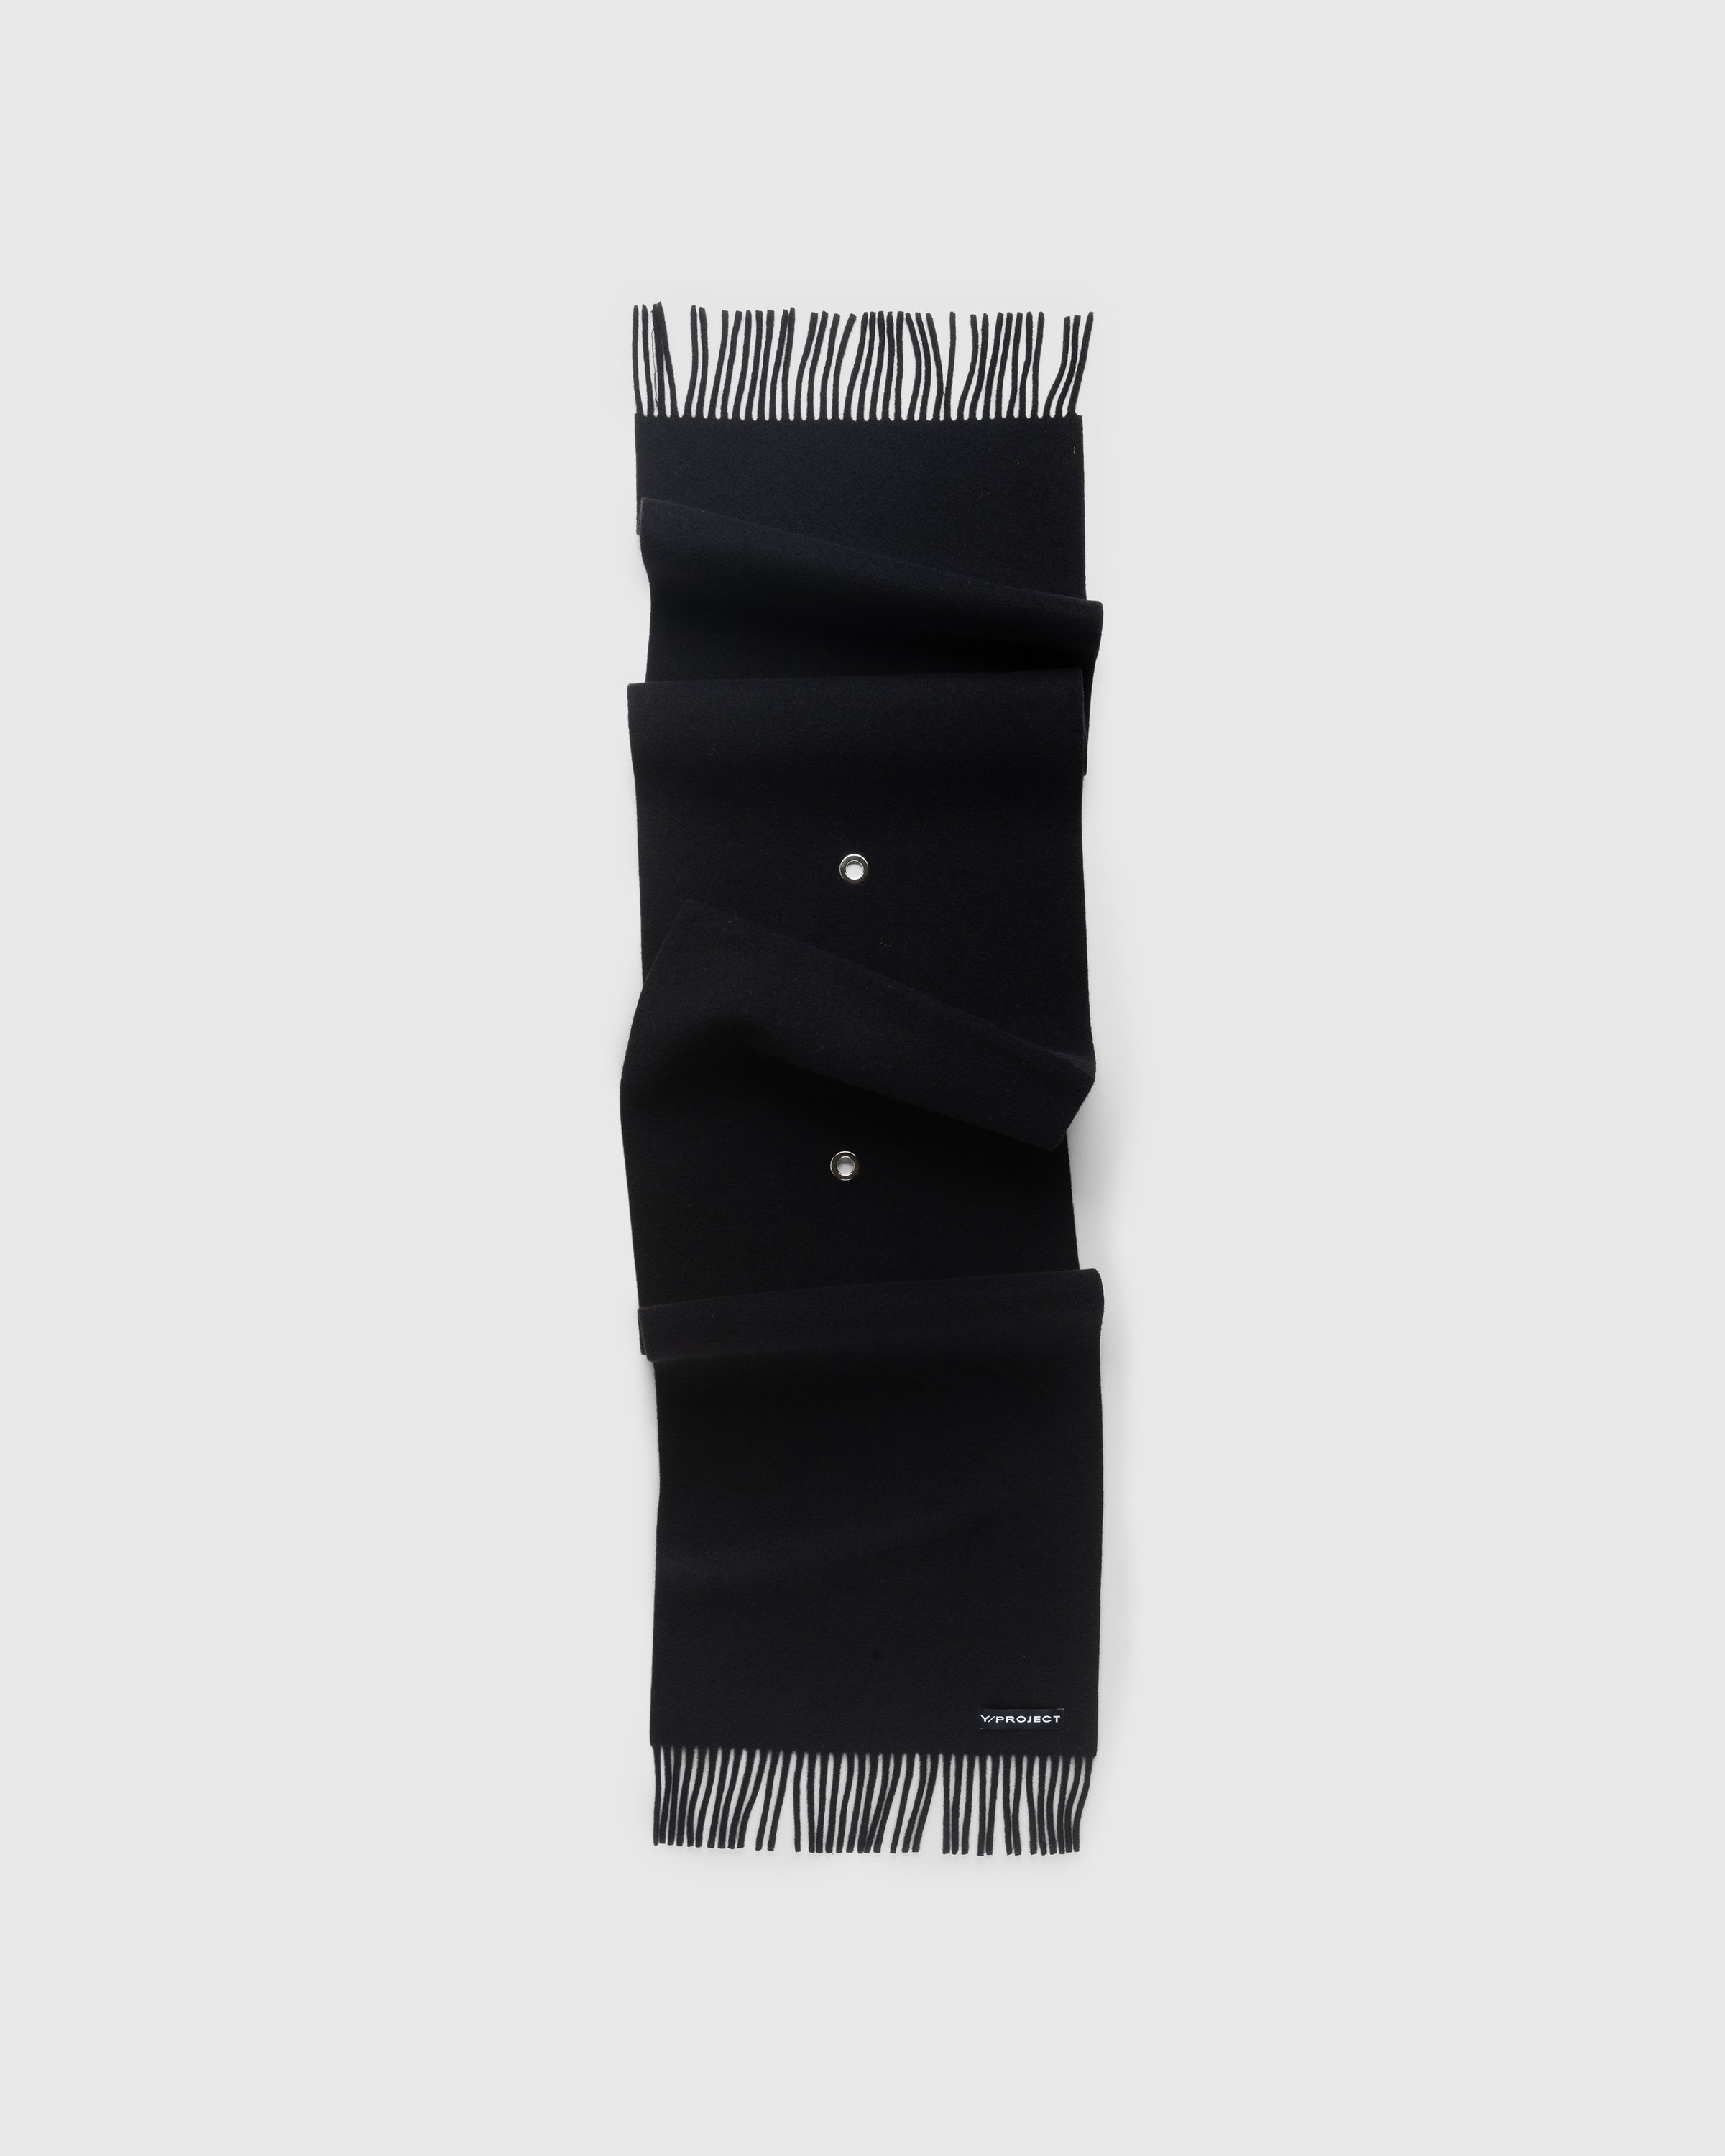 Y/Project - Chain Scarf Black/Silver - Accessories - Black - Image 1